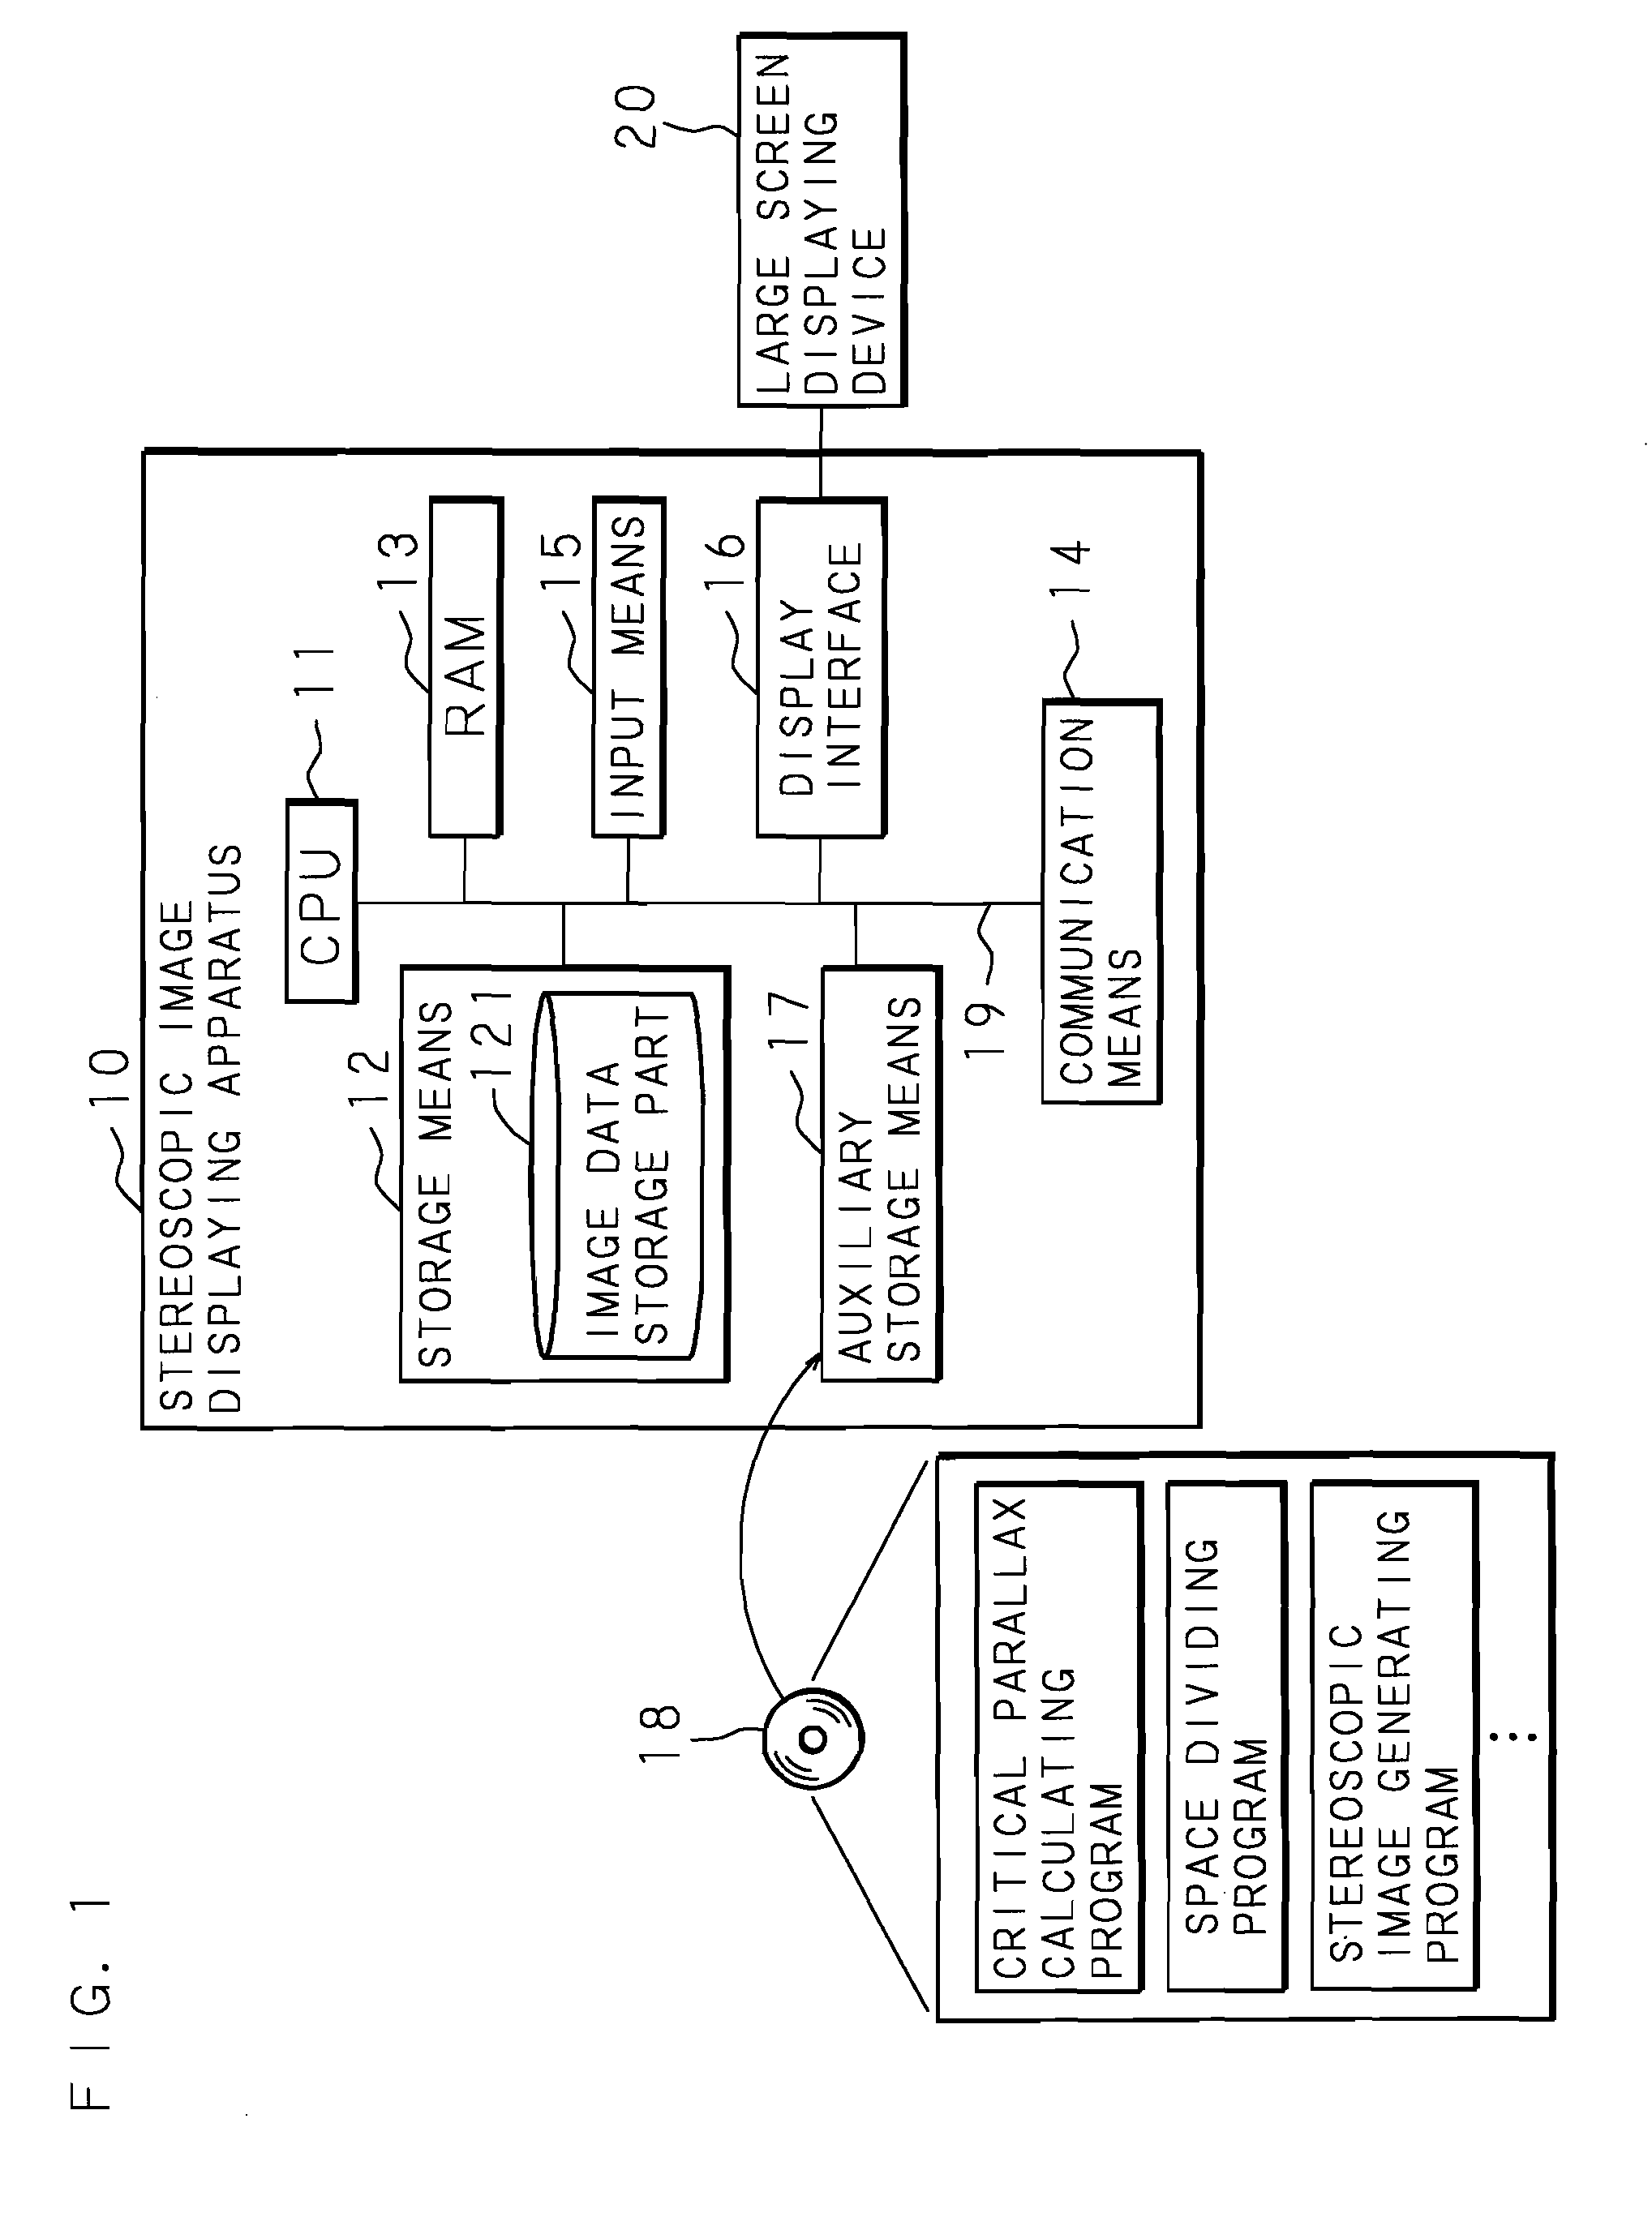 Stereoscopic Image Display Apparatus, Stereoscopic Image Displaying Method And Computer Program Product